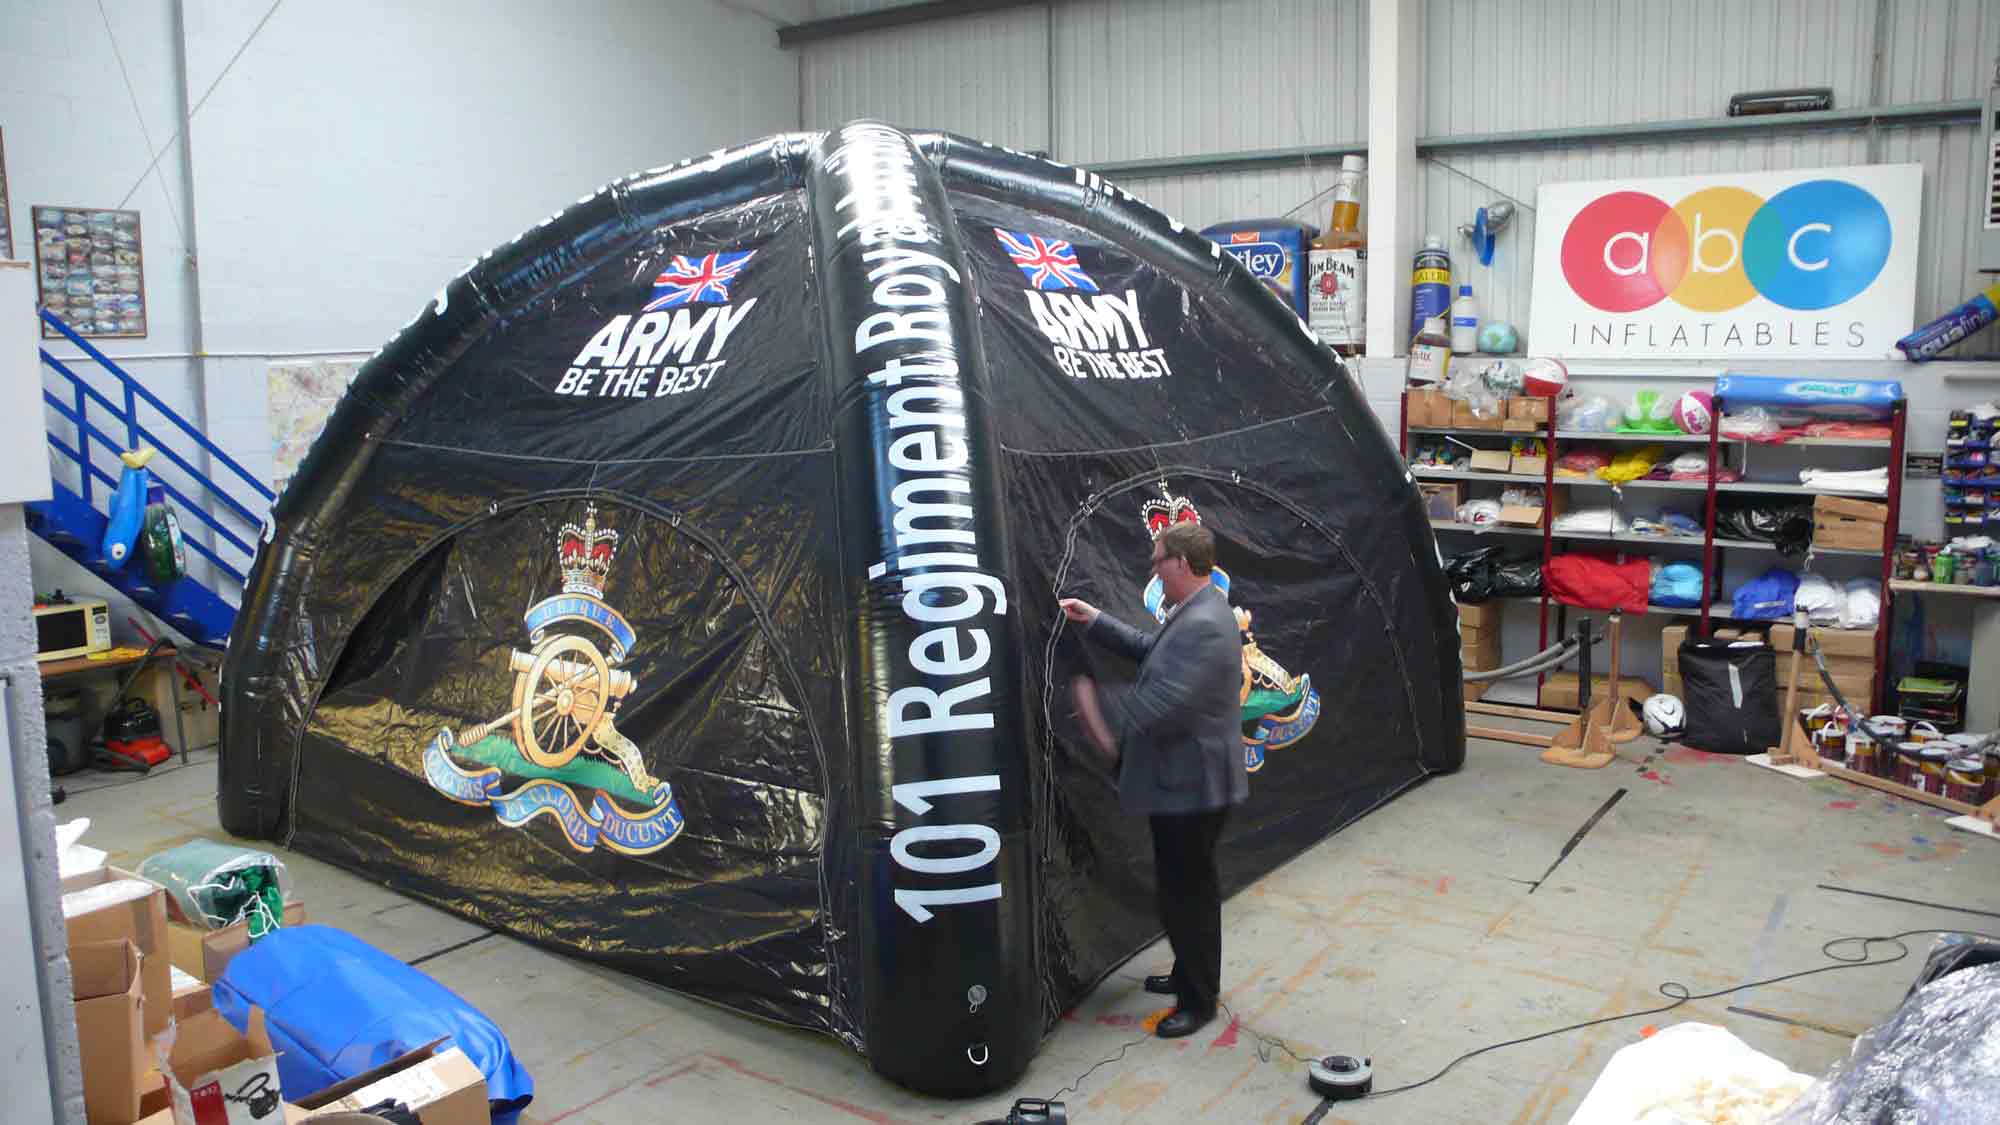 Zipped doors on inflatable branded tent